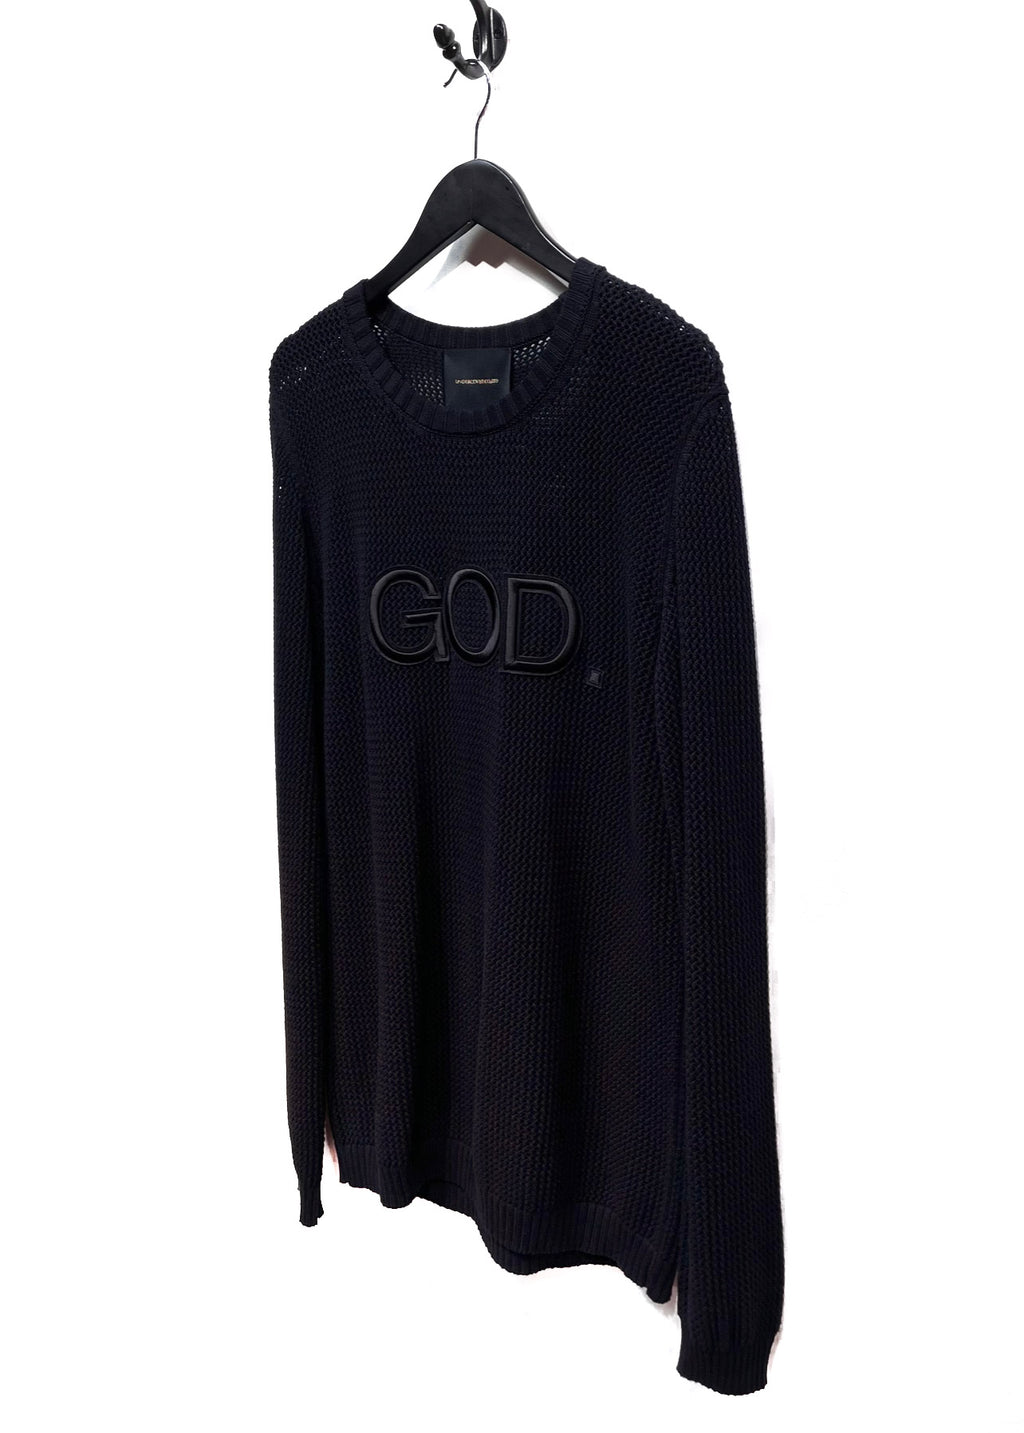 Undercover Black Opened Knit God Dog Embroidered Sweater